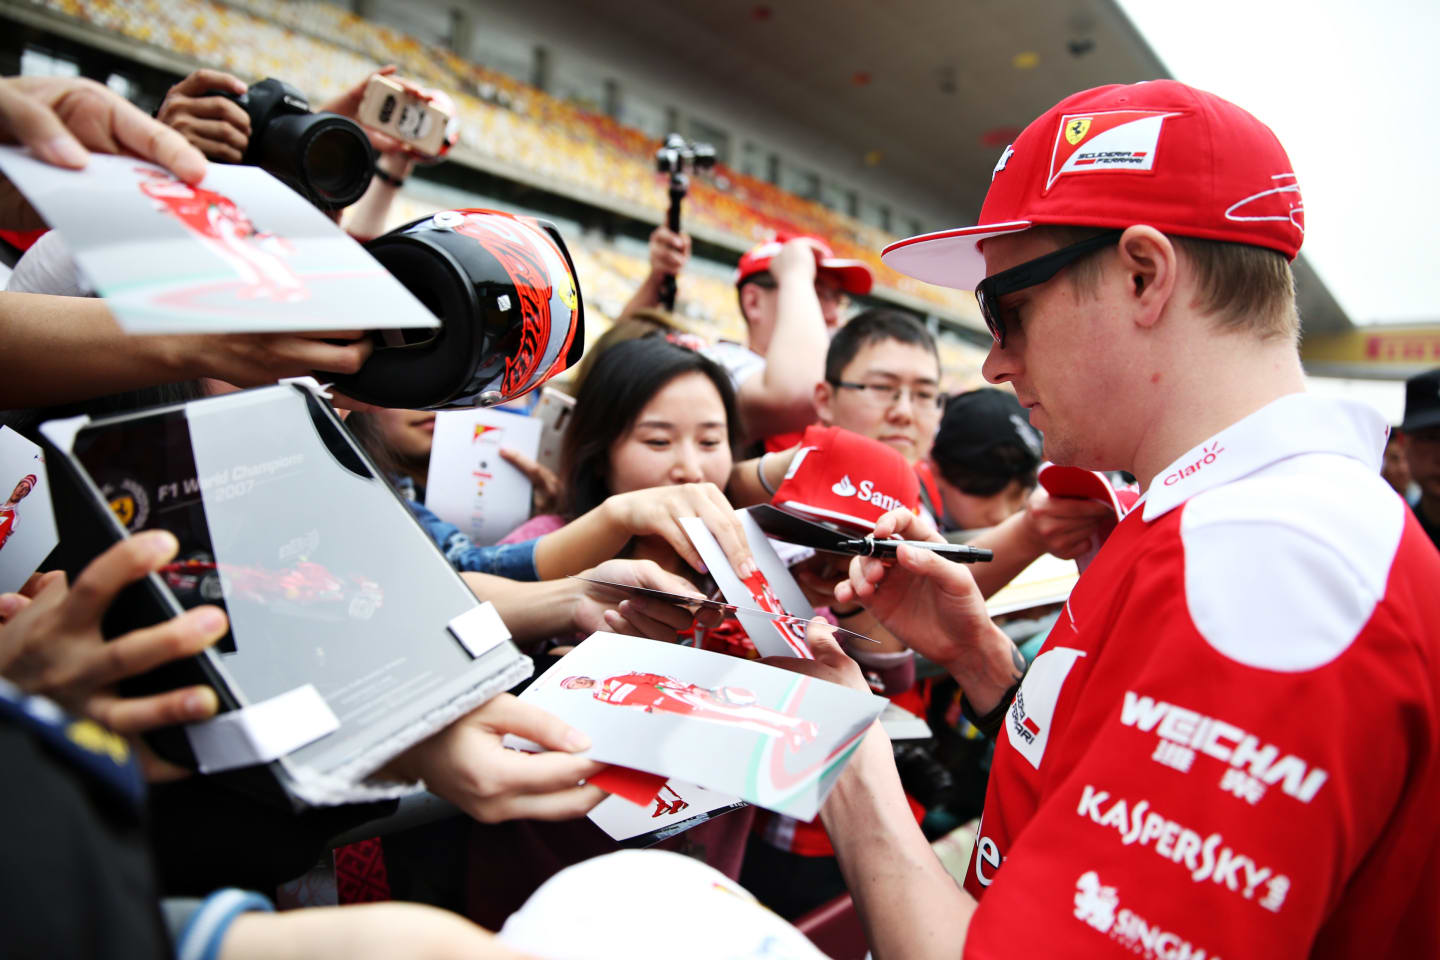 SHANGHAI, CHINA - APRIL 14: Kimi Raikkonen of Finland and Ferrari signs autographs for fans in the